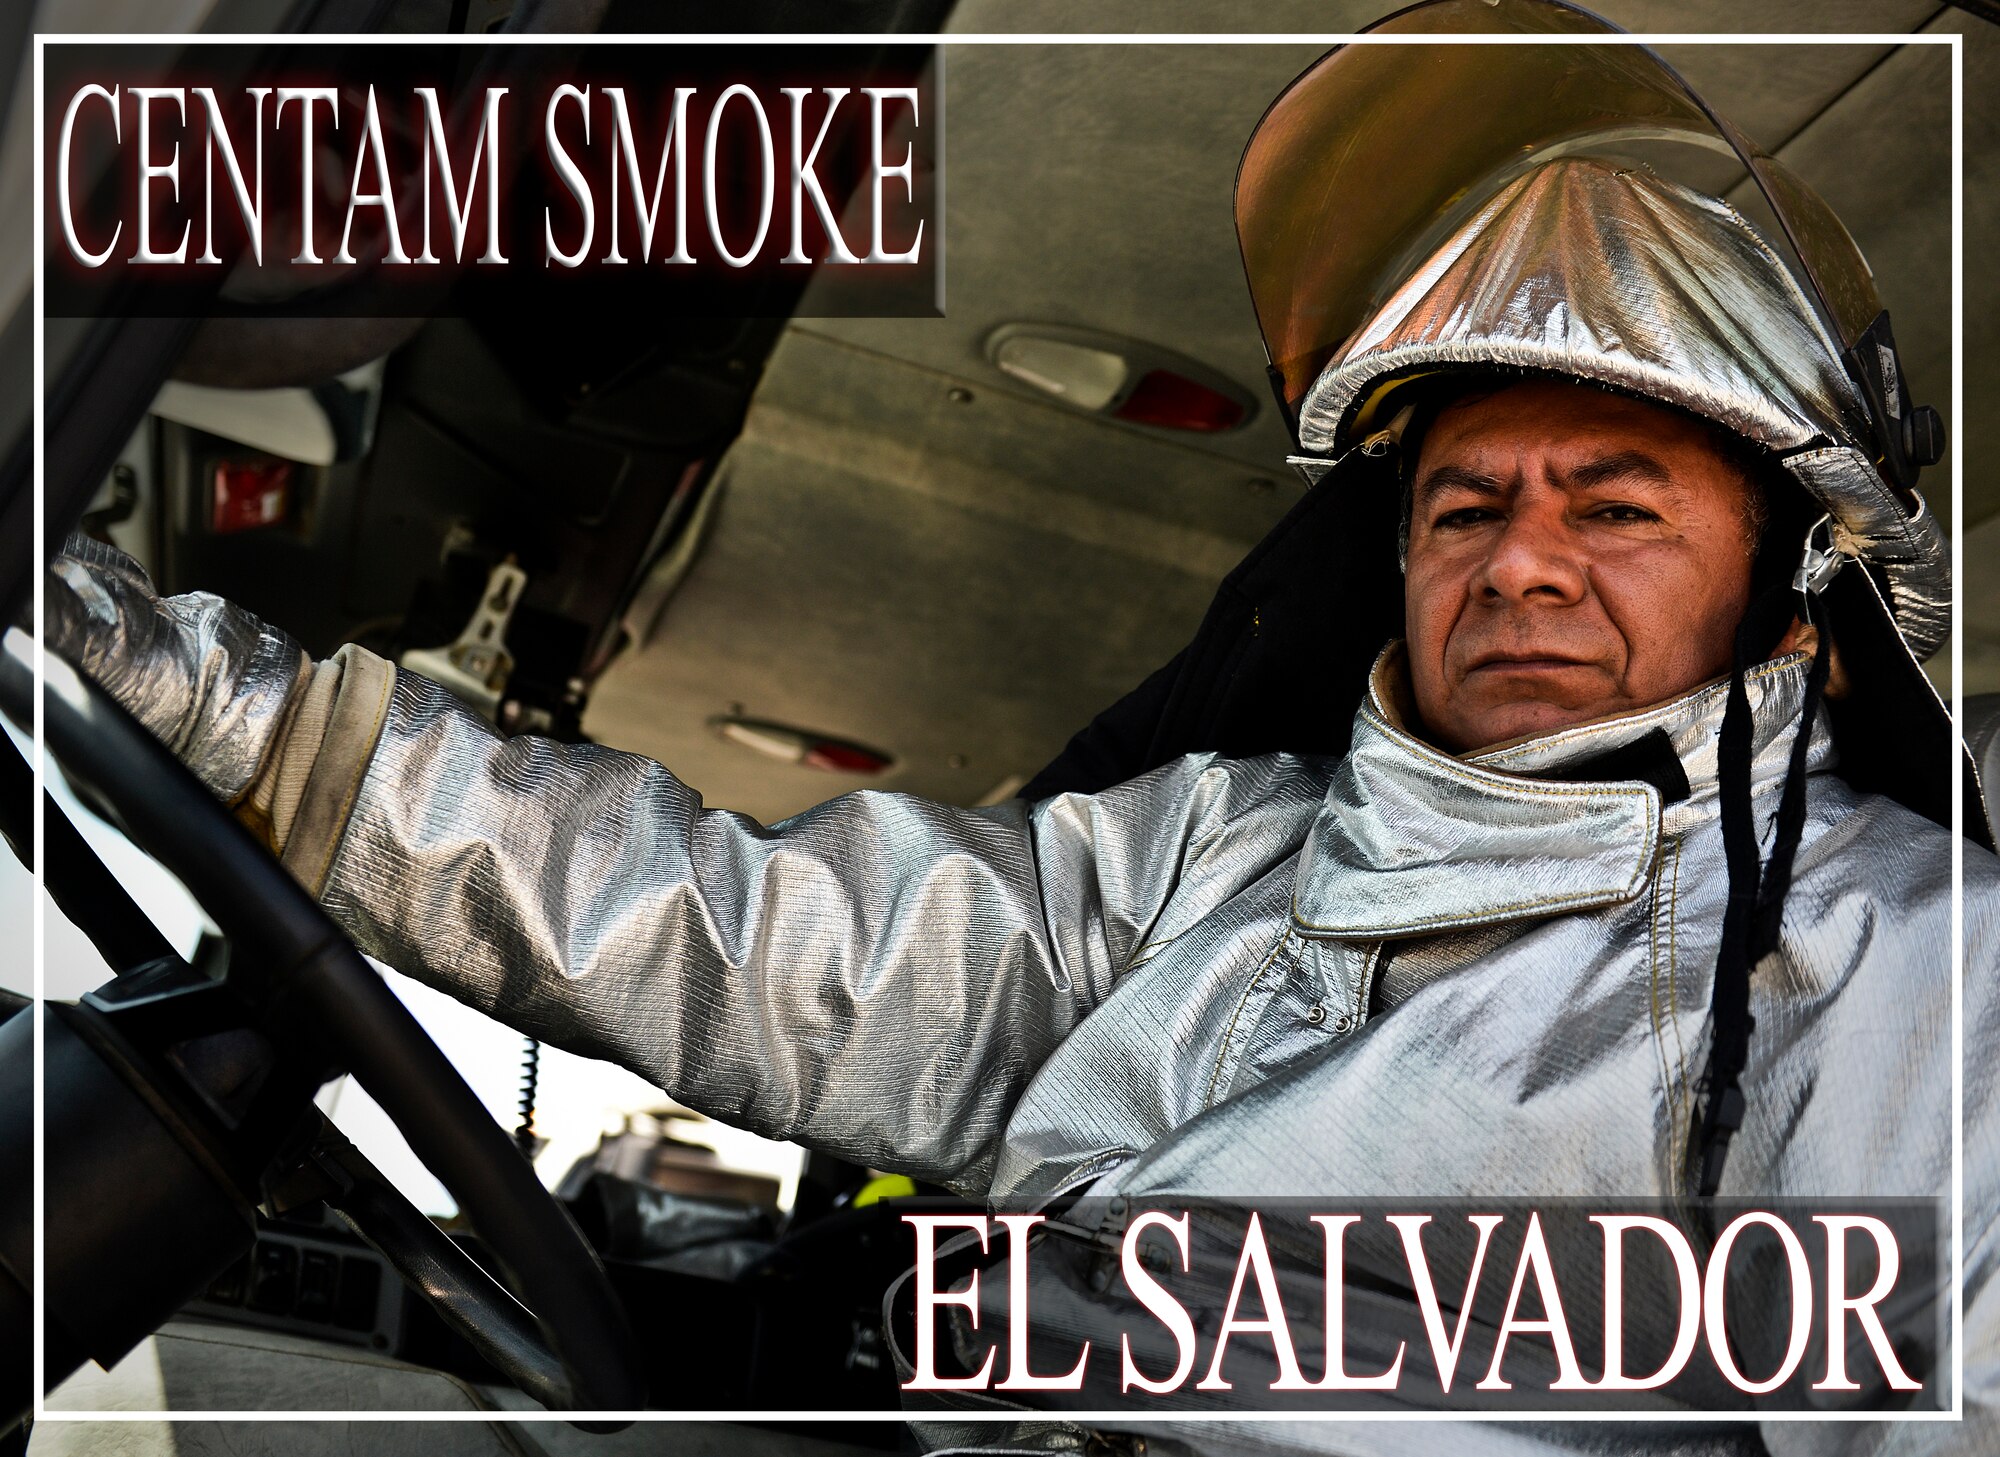 Oscar Humberto Perez Gutierrez, who has worked as an airport firefighter for 30 years, takes a break from training during the CENTAM SMOKE exercise Aug. 28, 2015, at Soto Cano Air Base, Honduras. The exercise, known as Central America Sharing Mutual Operational Knowledge and Experience, or "CENTAM SMOKE," brings together U.S. and Central American firefighters to train and improve their ability to work together. (U.S. Air Force illustration by Staff Sgt. Jessica Condit)